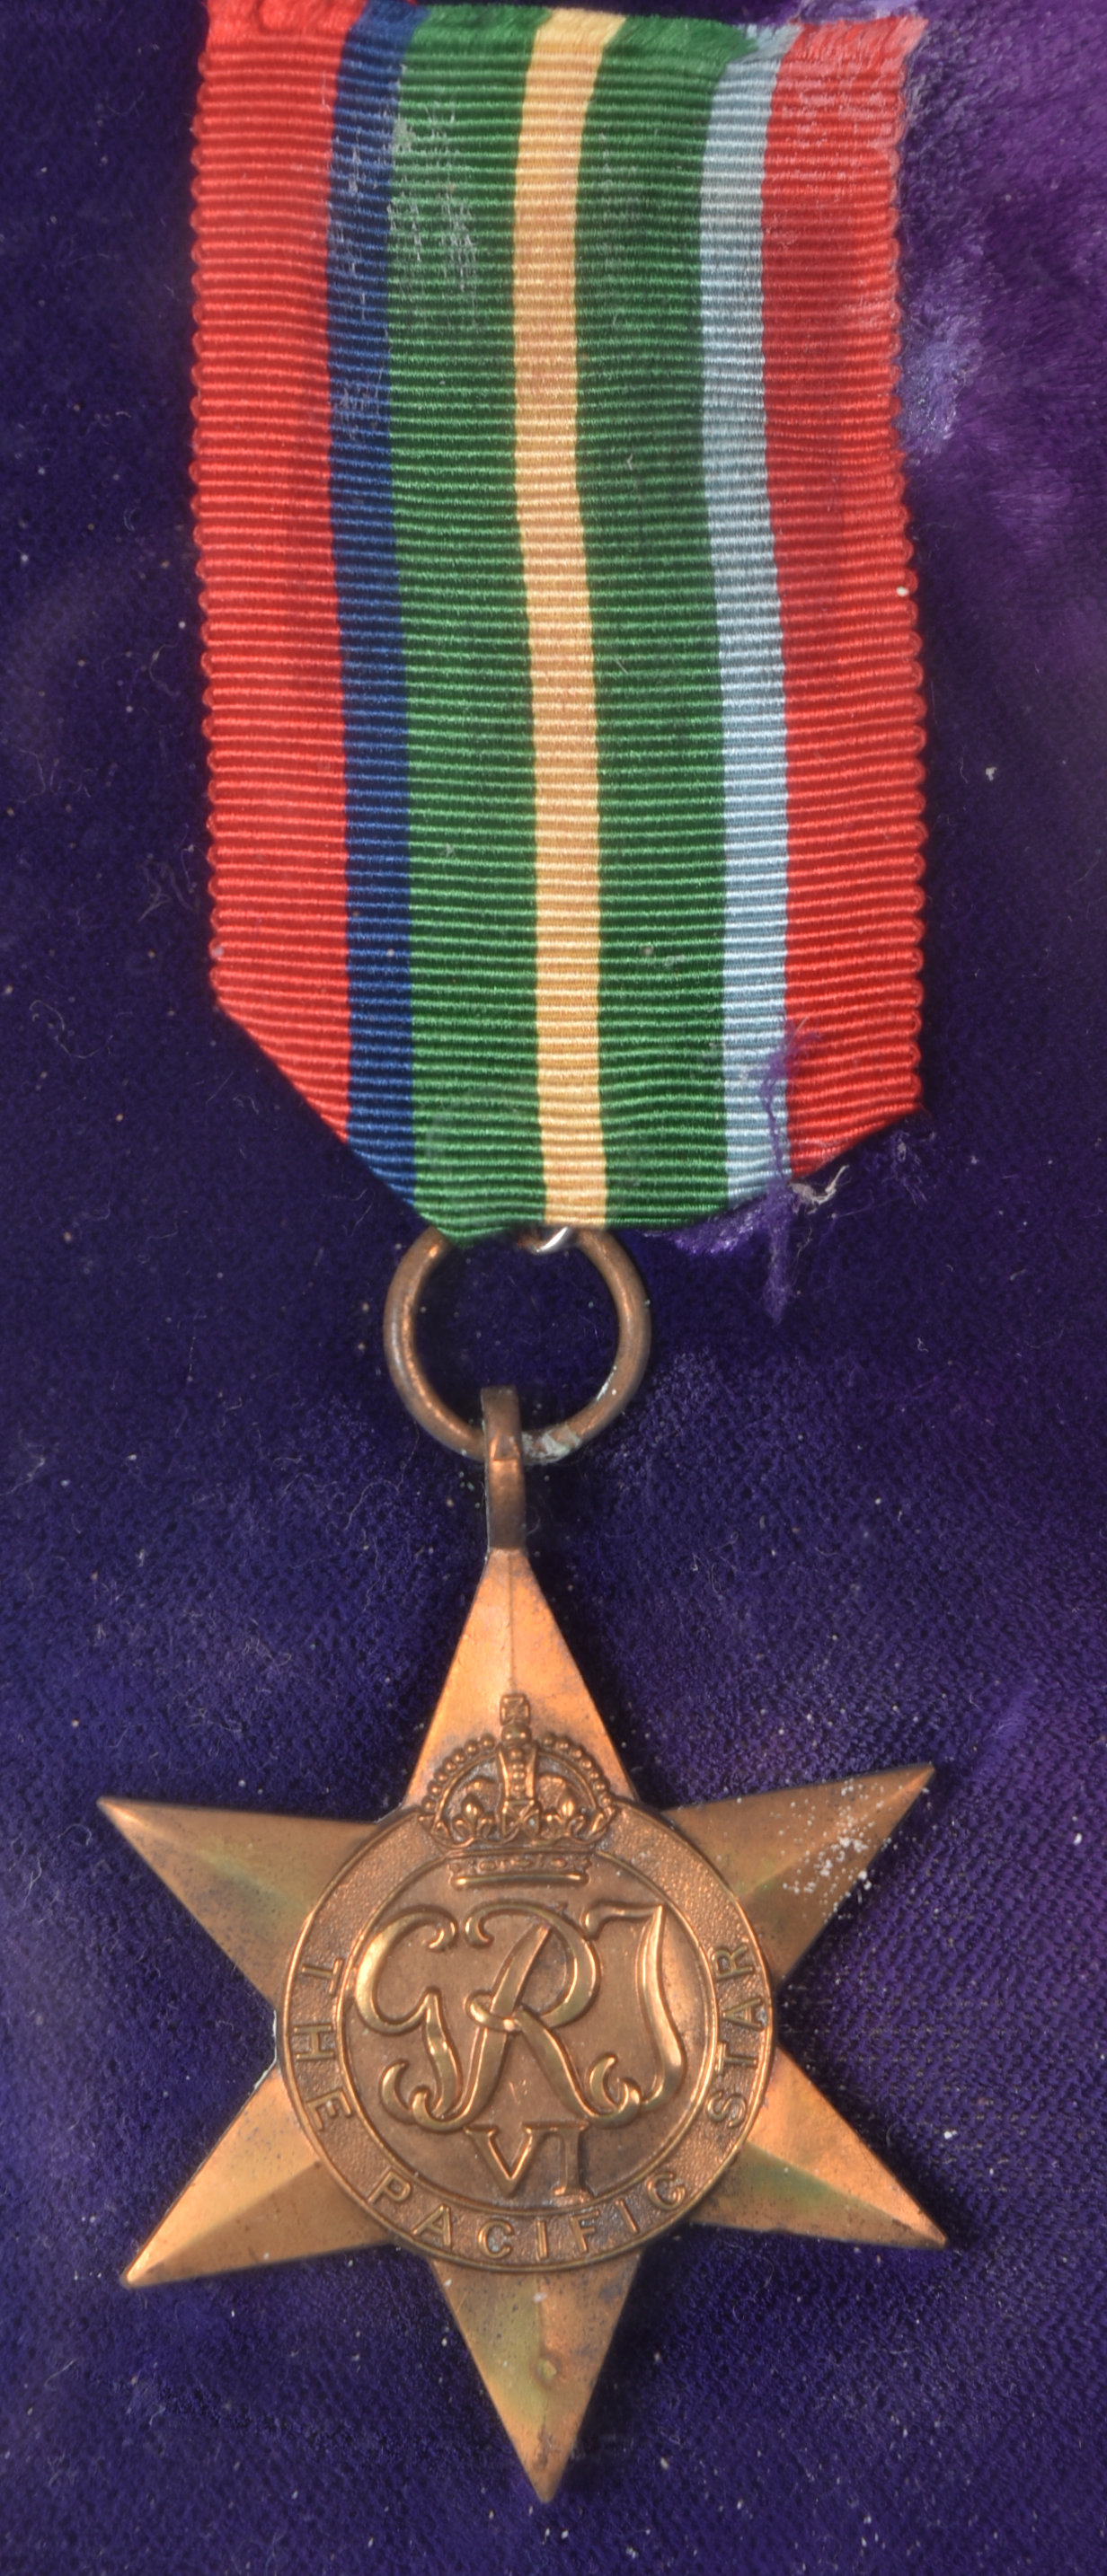 WWII SECOND WORLD WAR MEDAL TRIO - R. KELLY ROYAL NAVY - Image 8 of 8